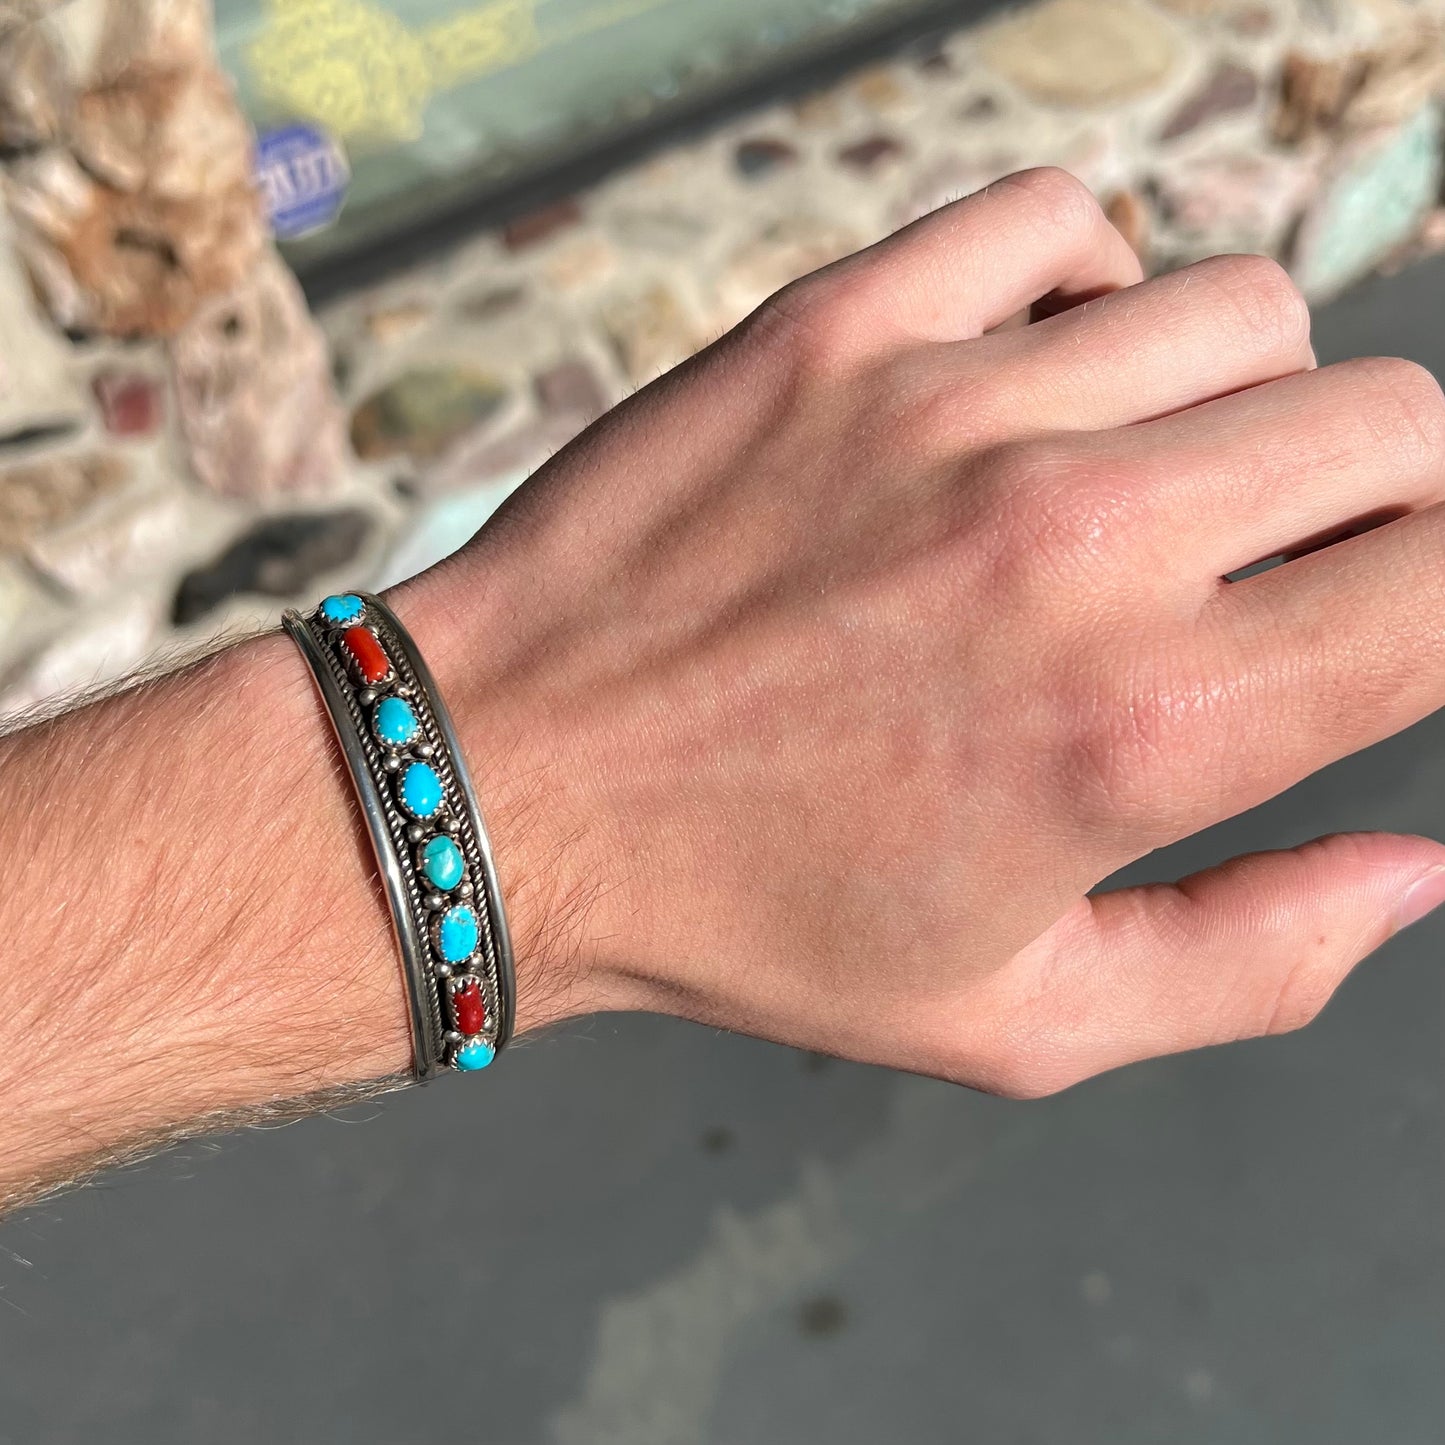 A silver ladies' turquoise and coral cuff bracelet, handmade by Navajo artist, John Delvin.